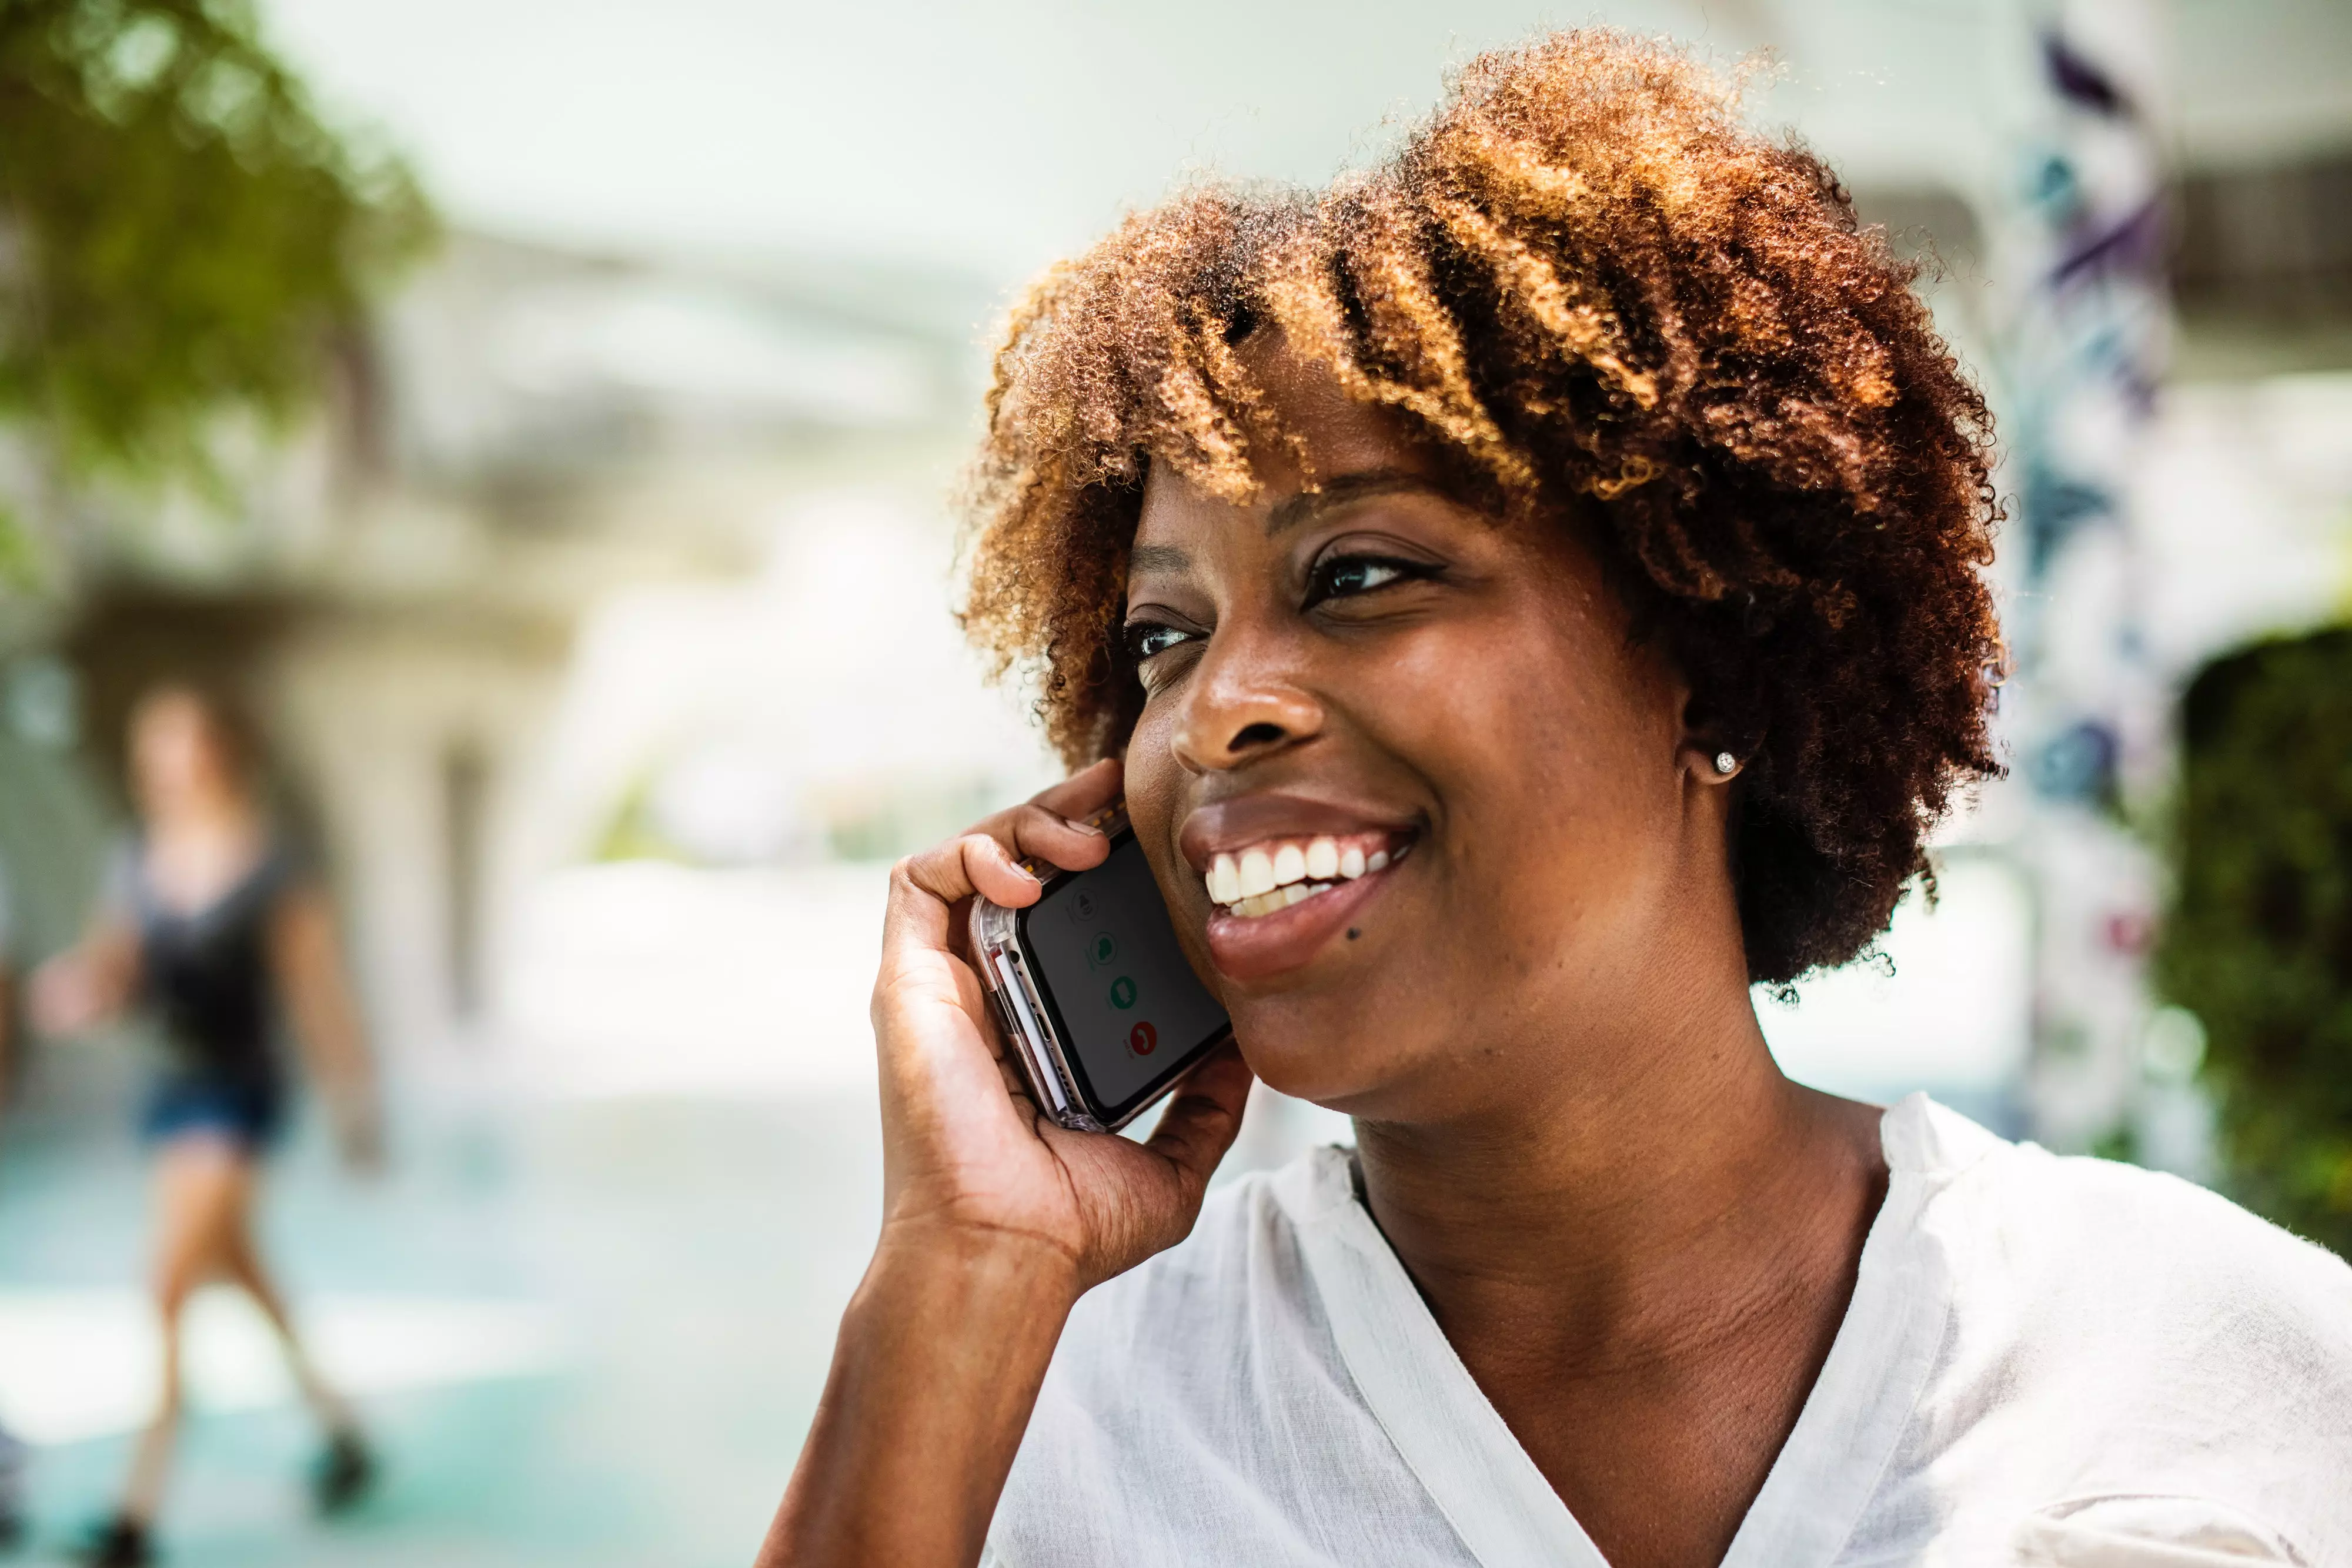 Smiling woman on the phone - photo: Pixabay